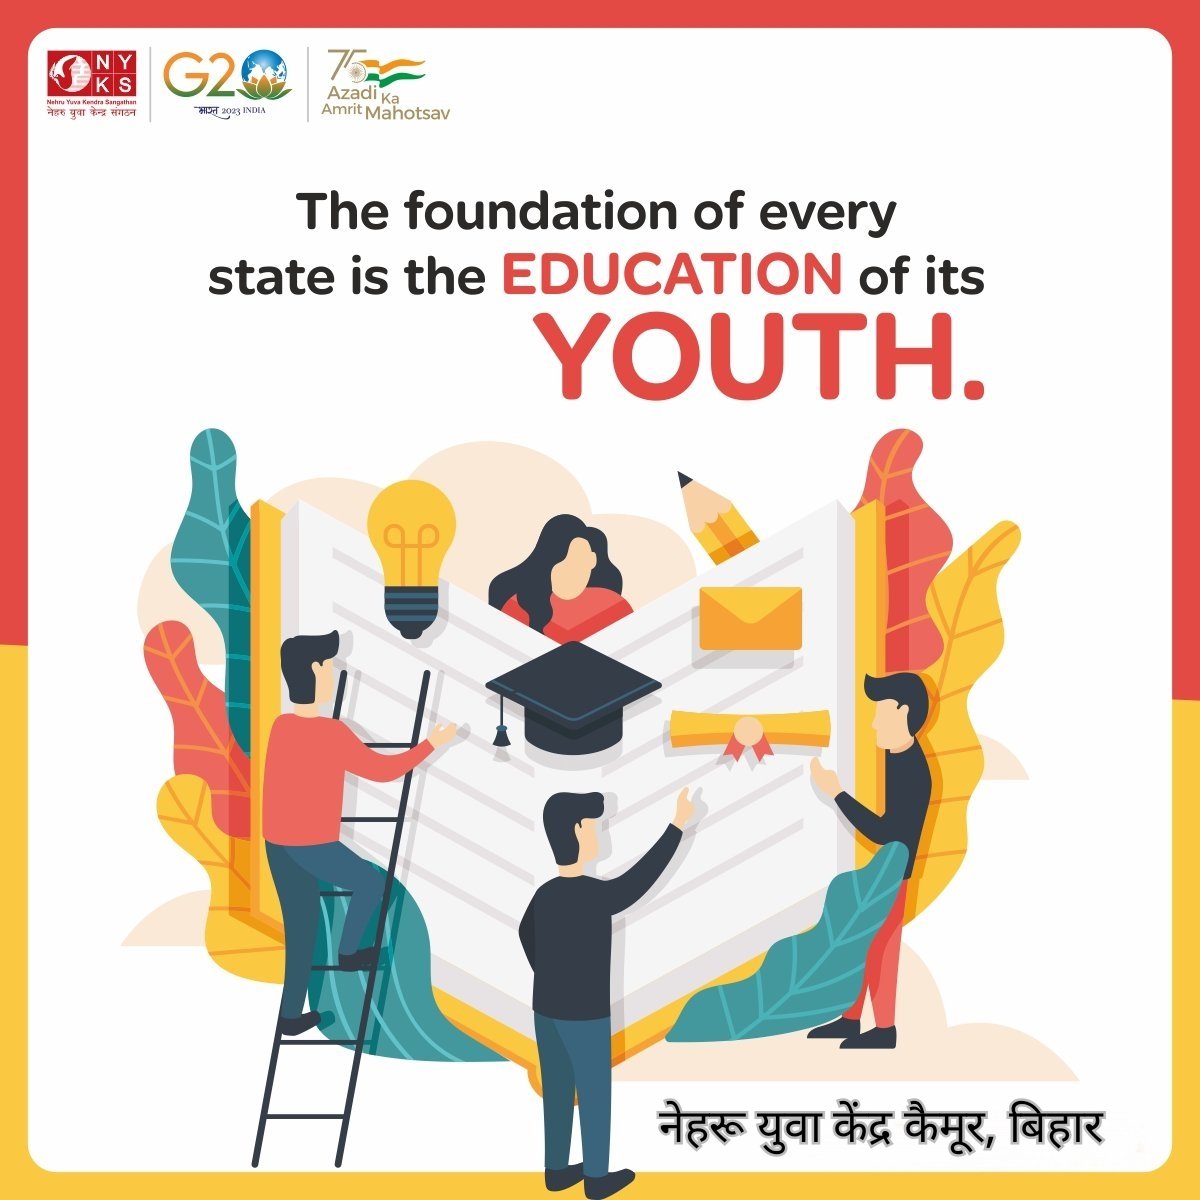 Quote of the Day!

The Education of youth should be one of the top most priorities of society. An educated youth can empower society and its people by eradicating poverty and hunger through employment. 

#Quote #sundayvibes #thoughtoftheday #YuvaUtsav2023 #Youth #Education